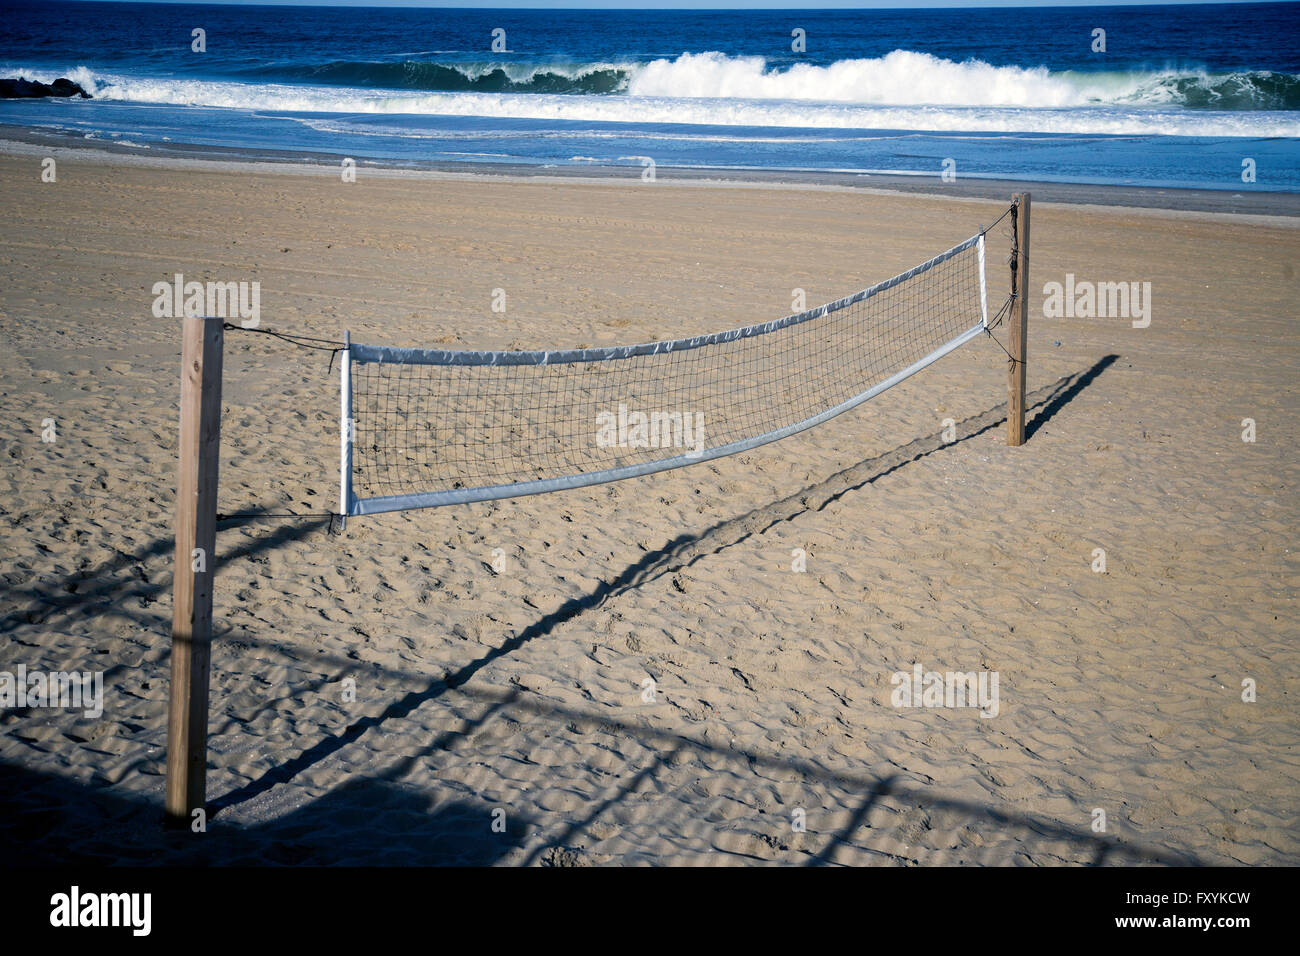 Volleyball net on the beach Stock Photo